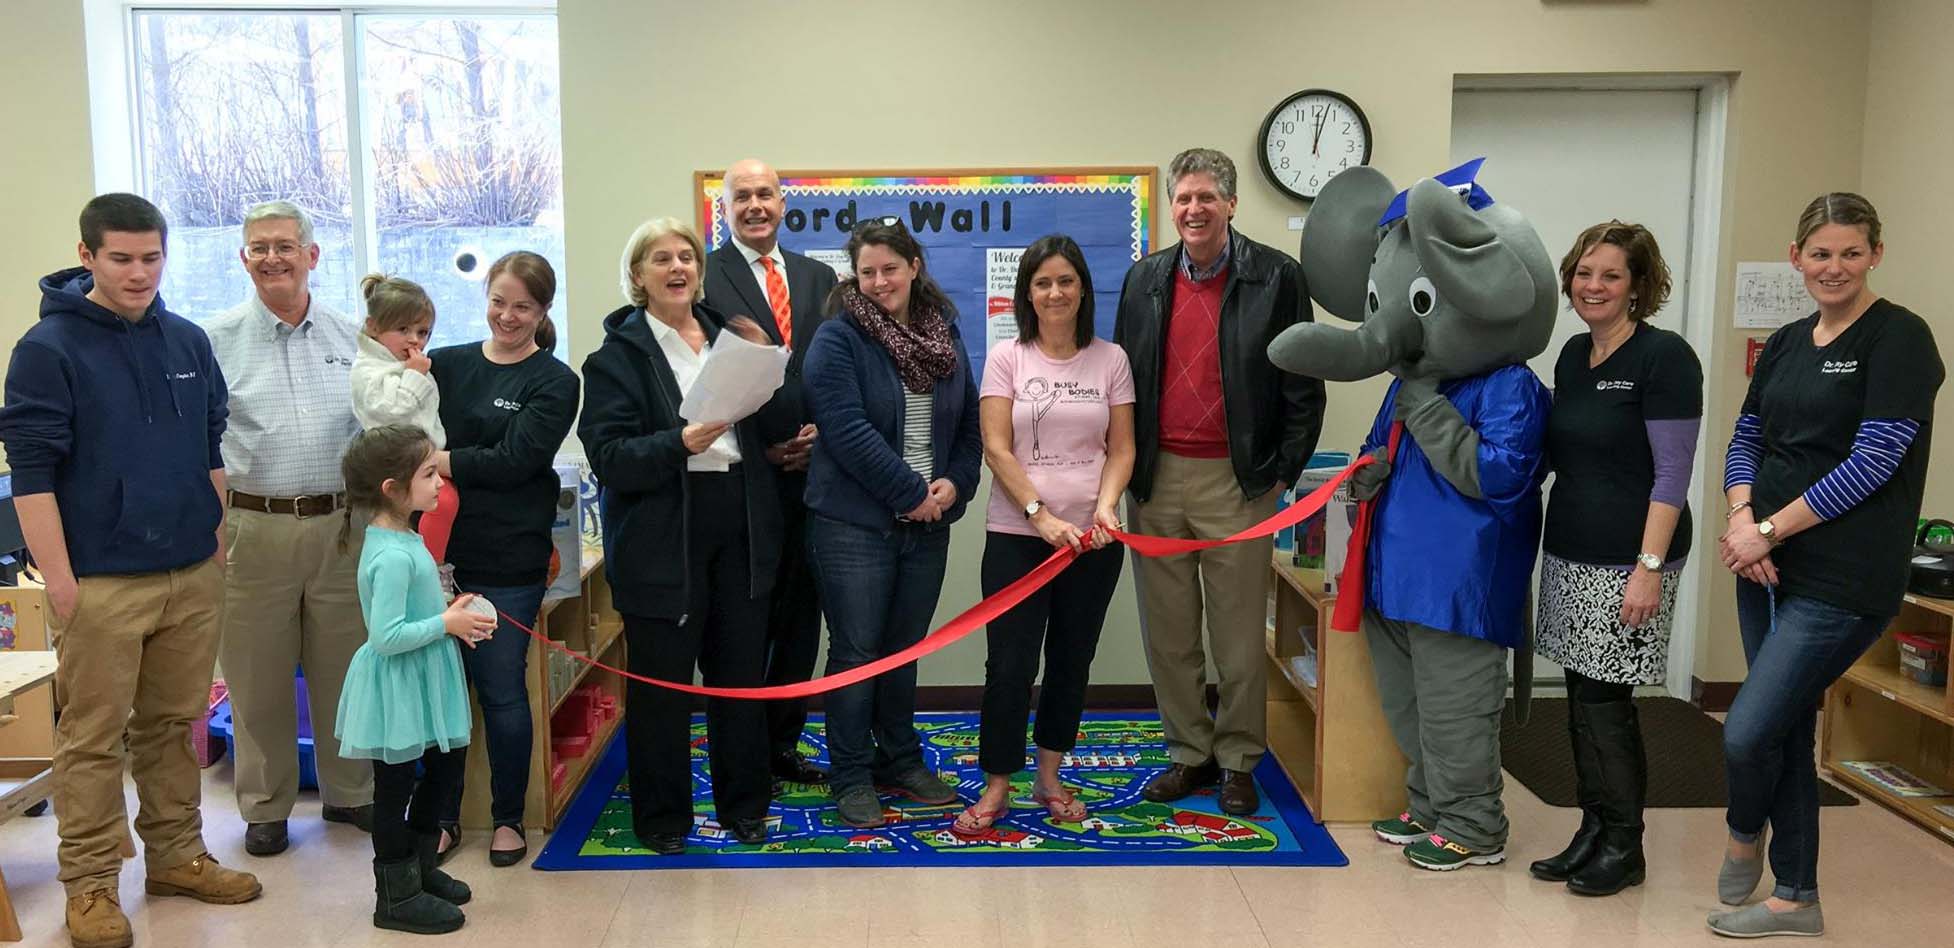 Dr. Day Care South County – grand opening and ribbon cutting!